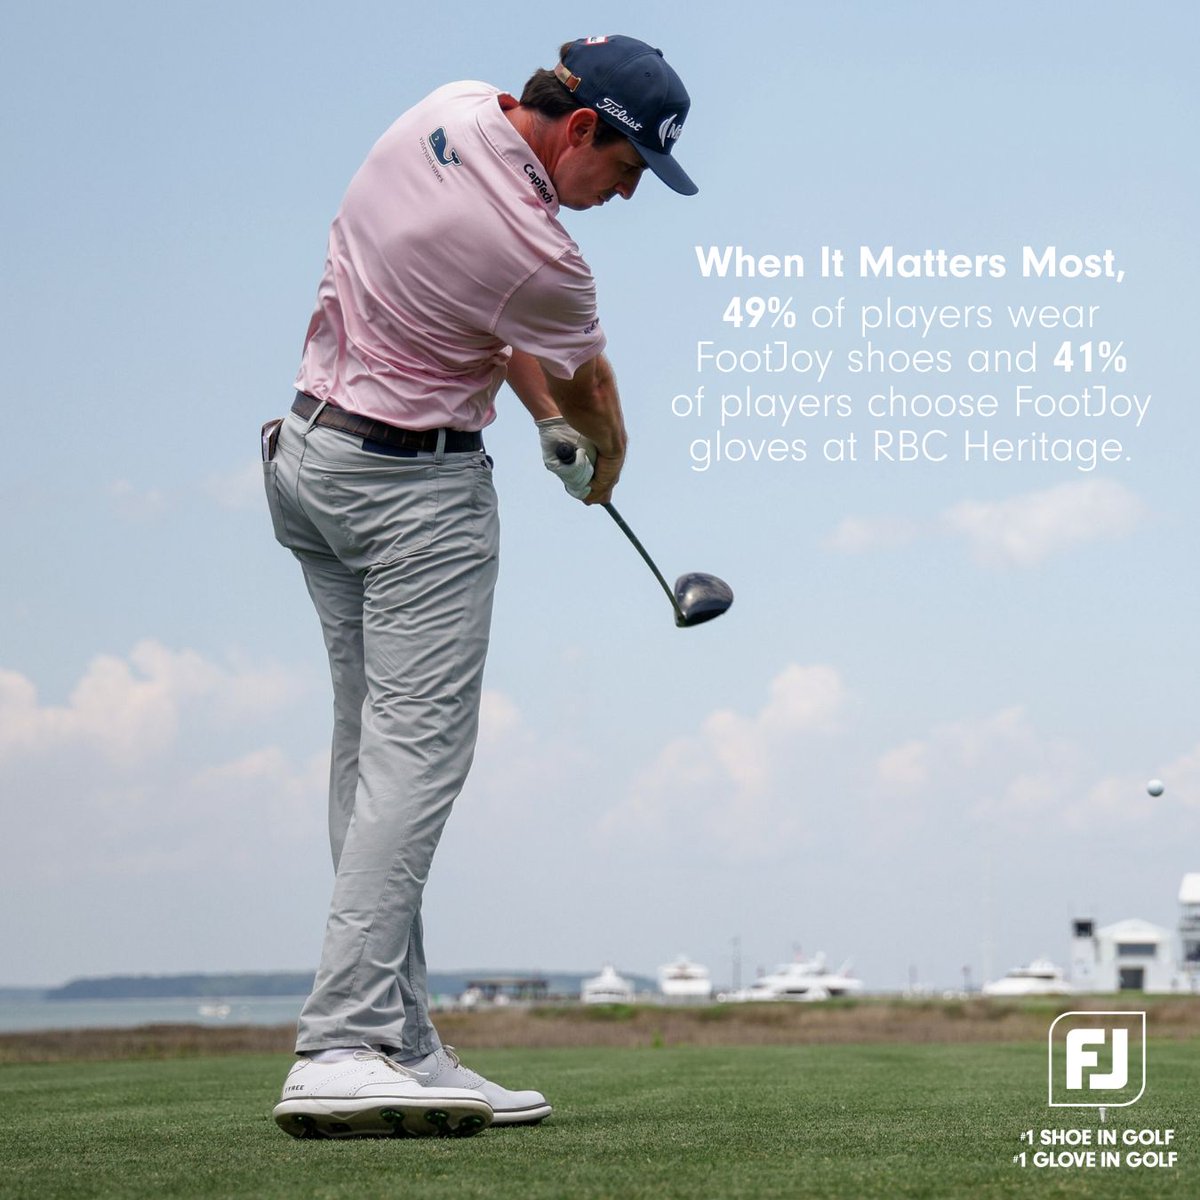 Depended on at Harbour Town. At this week's RBC Heritage, 49% of the field wear the #1ShoeInGolf and 41% of players choose the #1GloveInGolf. #WhenItMattersMost